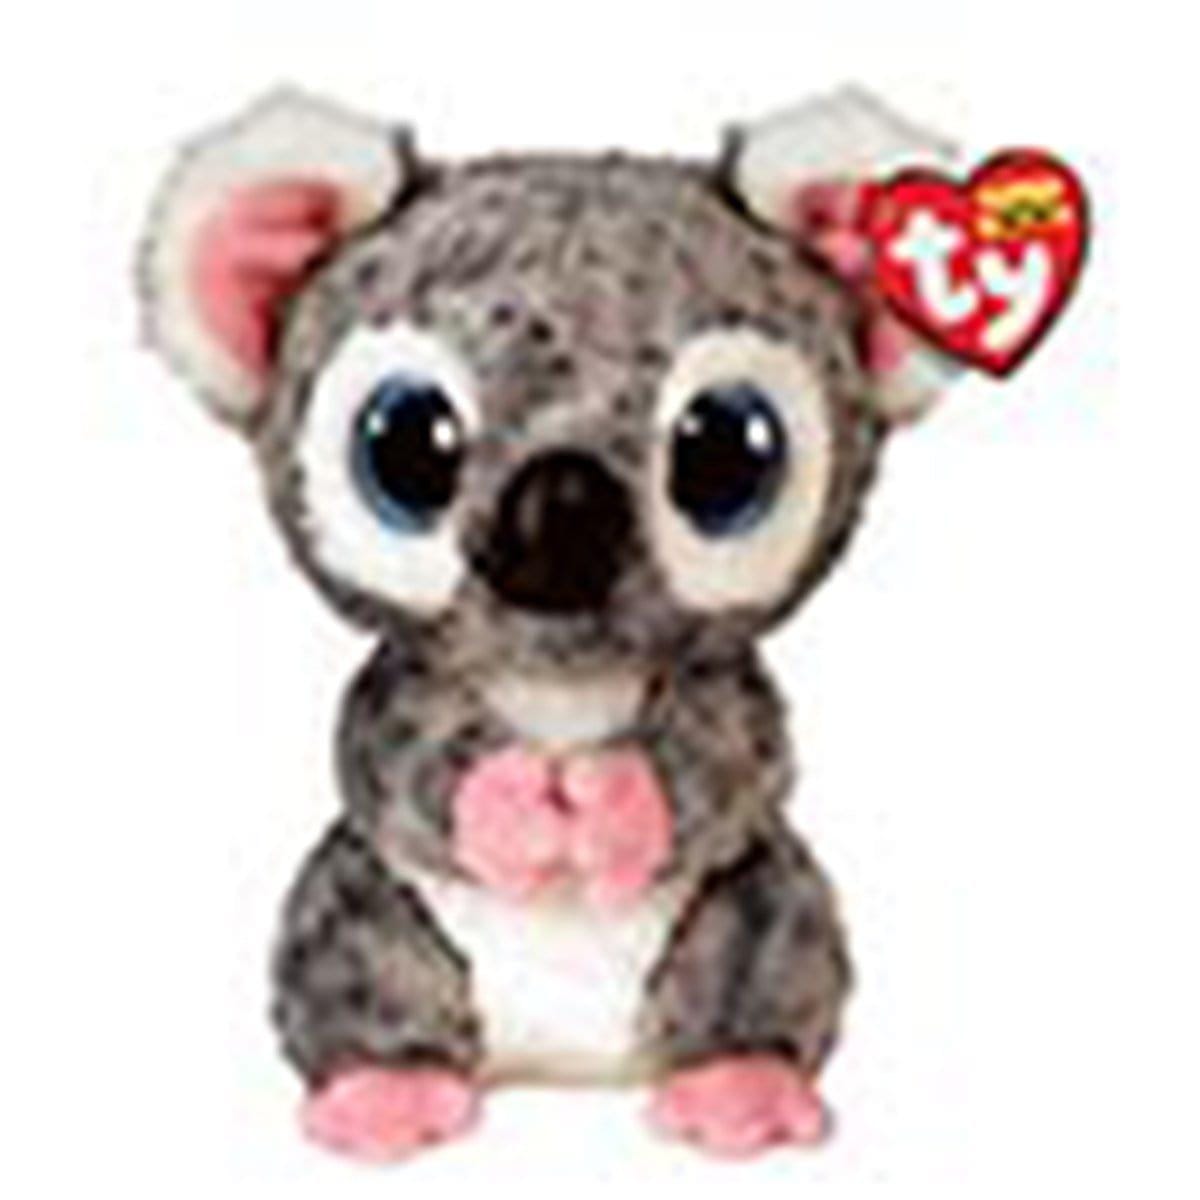 Buy plushes Beanie Boo's - Karli sold at Party Expert